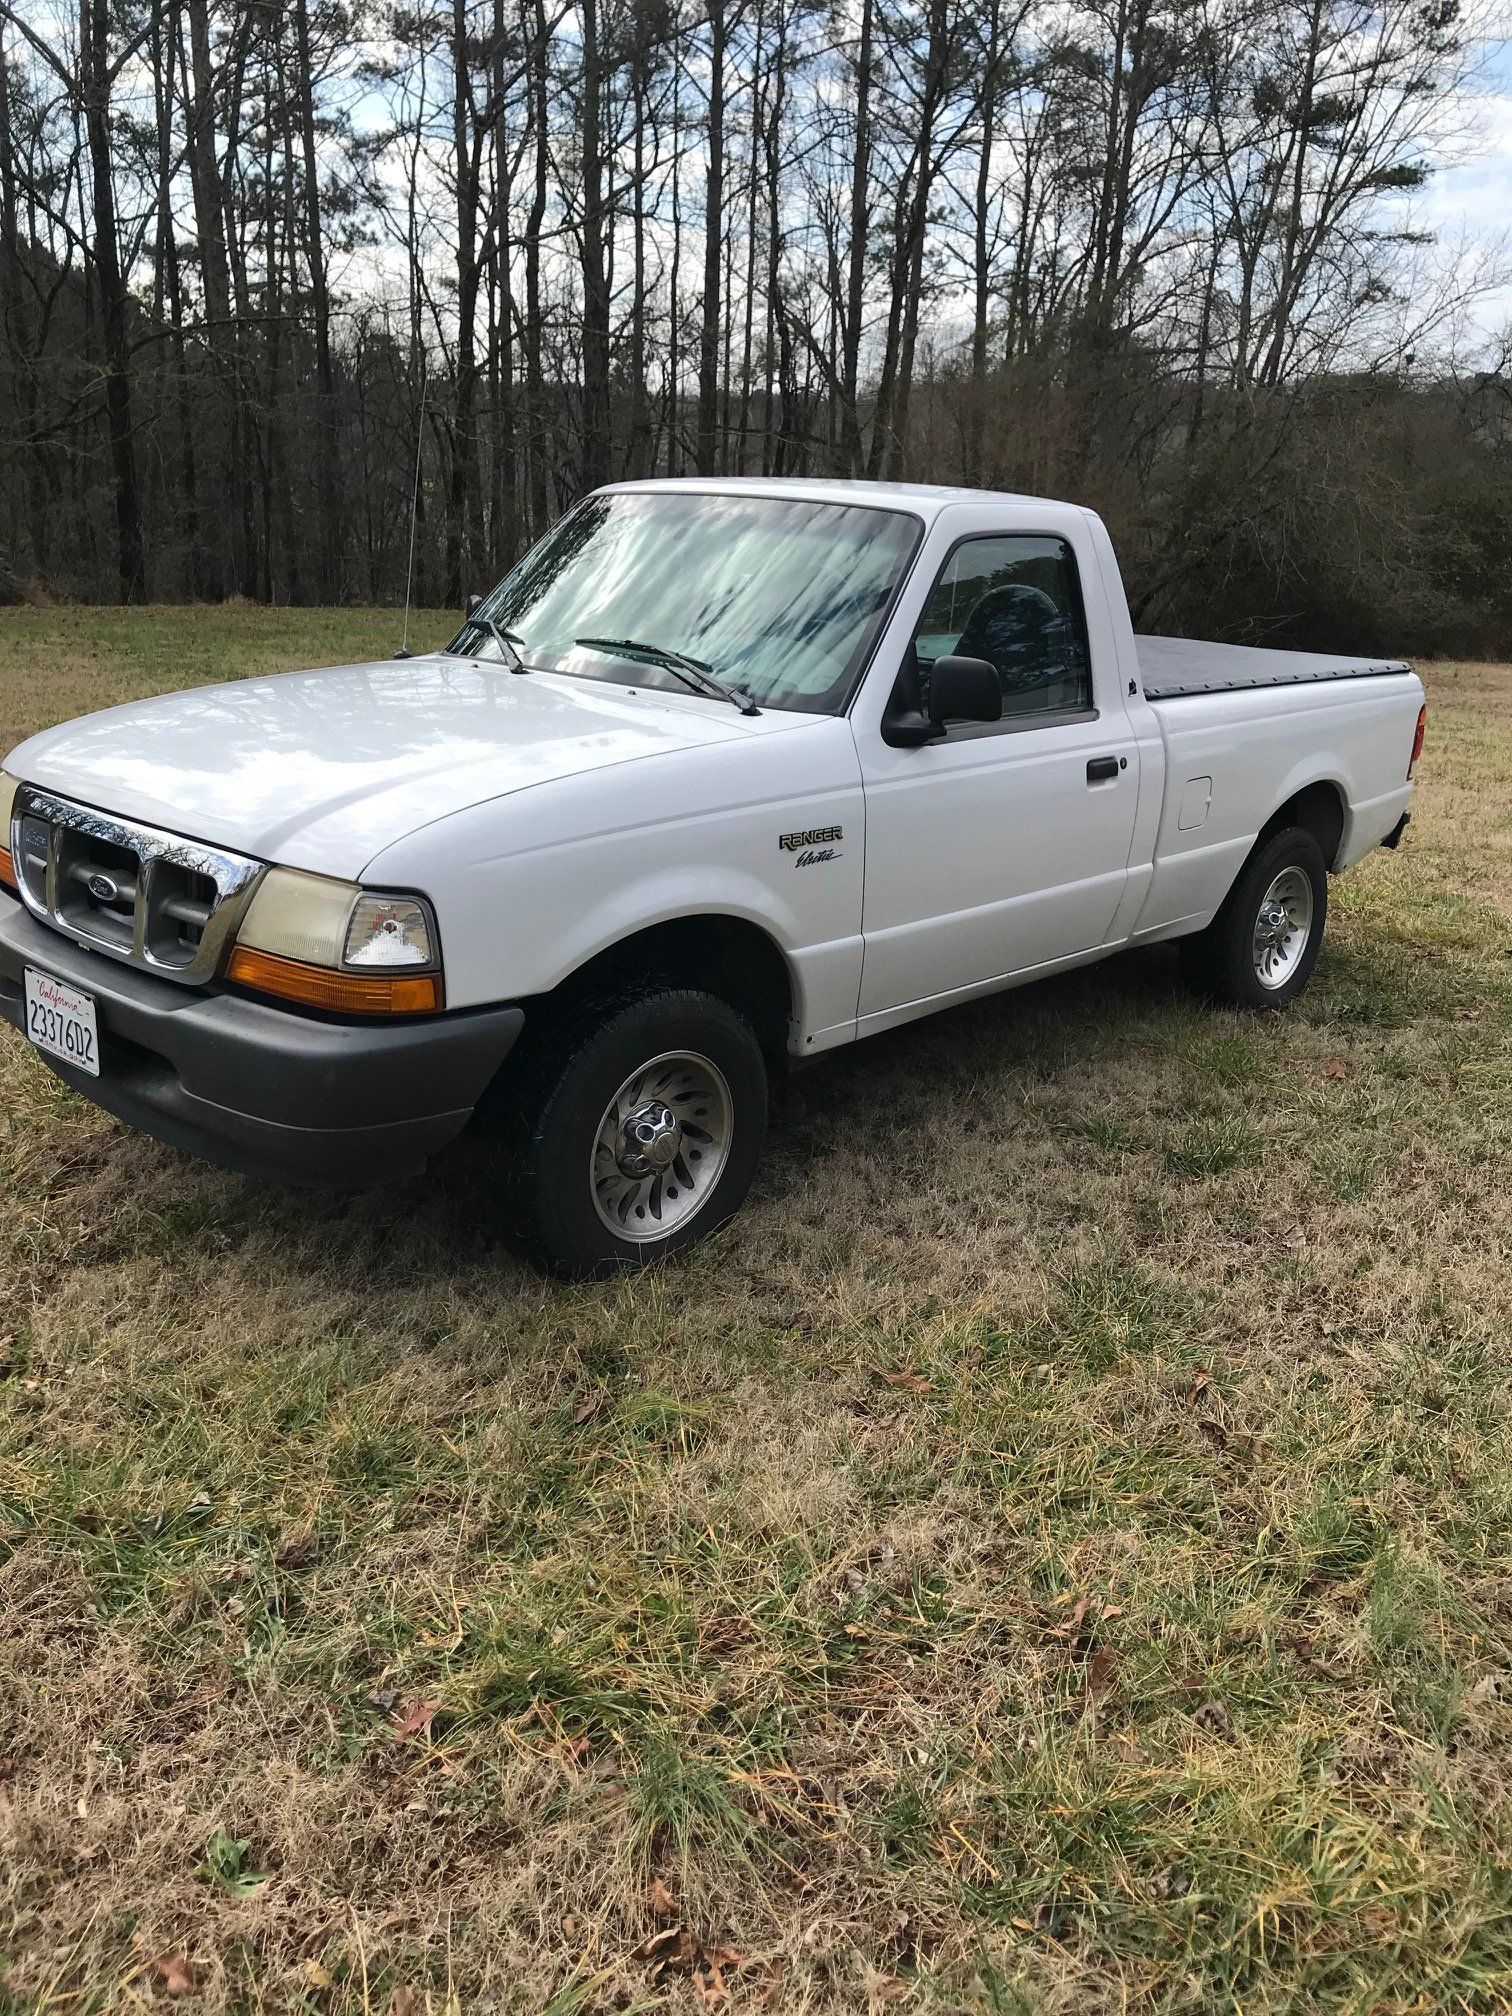 white ford ranger ev on grass in small field or clearing